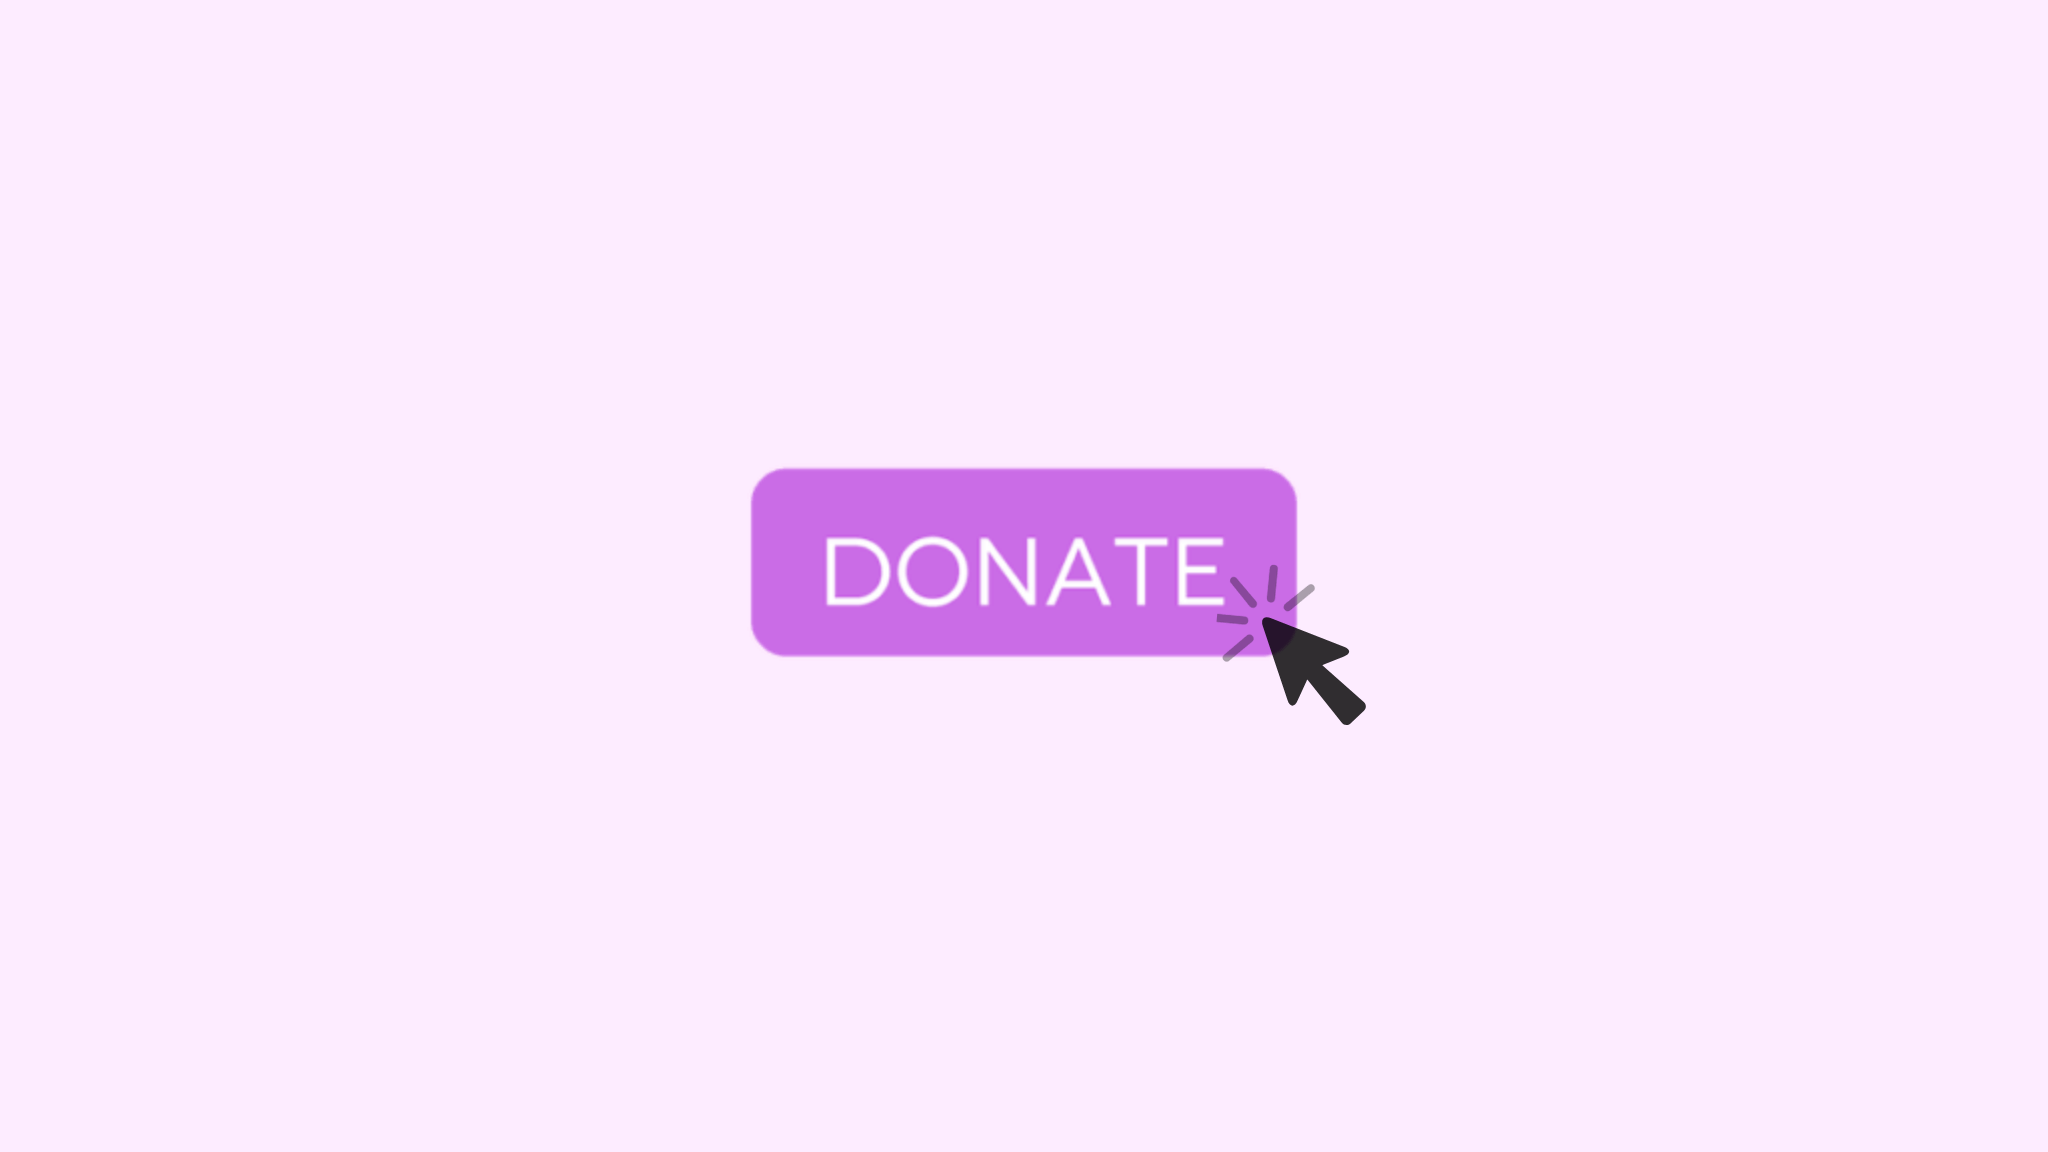 Donate Button Png 320px